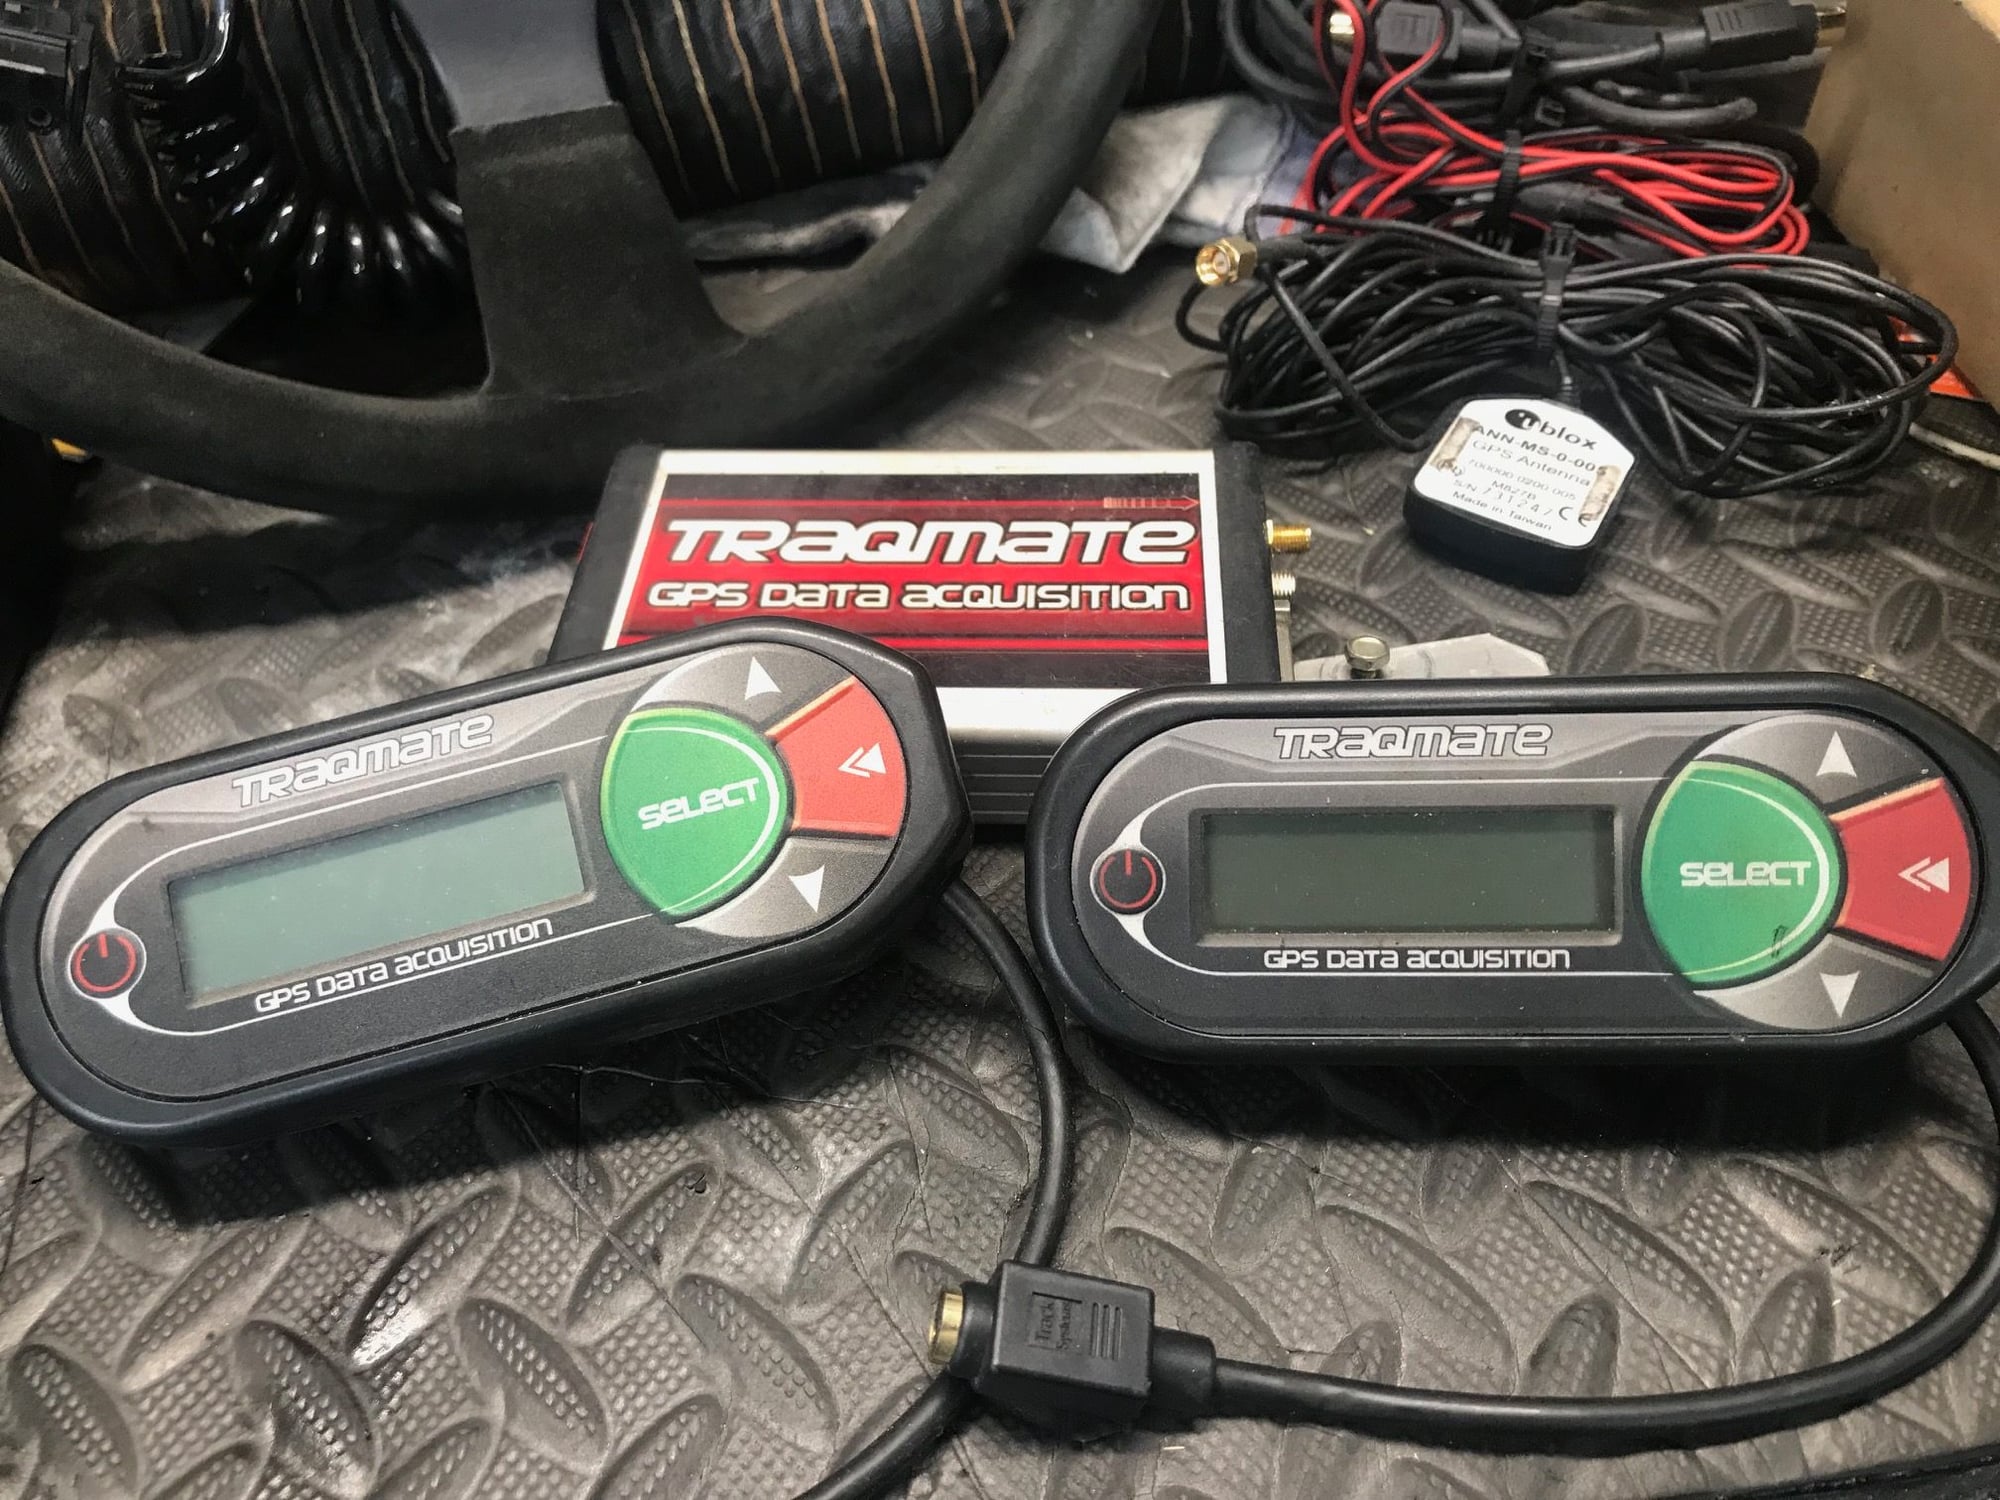 Accessories - traqmate data acquisition - Used - All Years Any Make All Models - Great Falls, VA 22066, United States